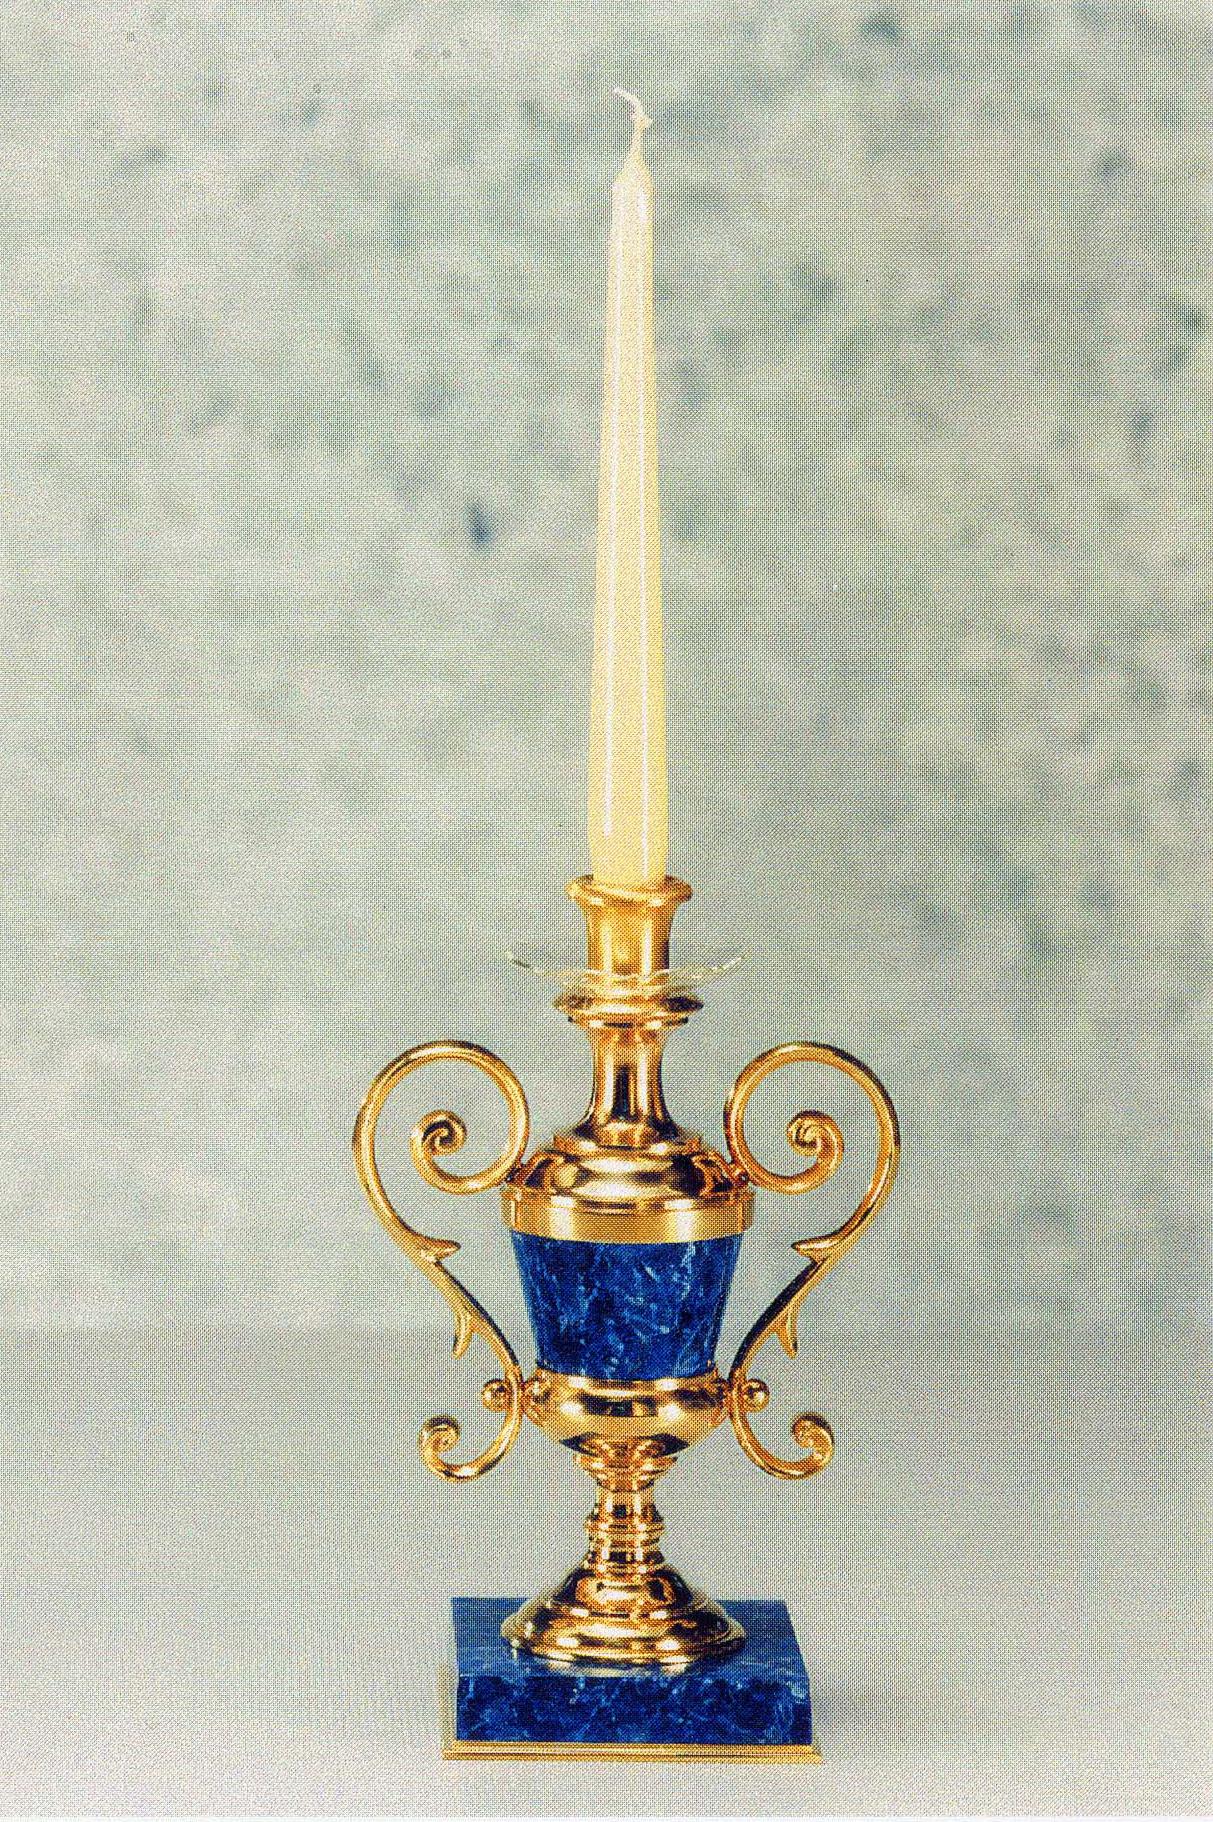 Neoclassical style Gilt Bronze and Cut Crystal Lamp By Gherardo Degli Albizzi features Classic amphor shape and curved handles. Central body of this little lamp could be customized with cut crystal, marble, or semi precious stones like malachite or